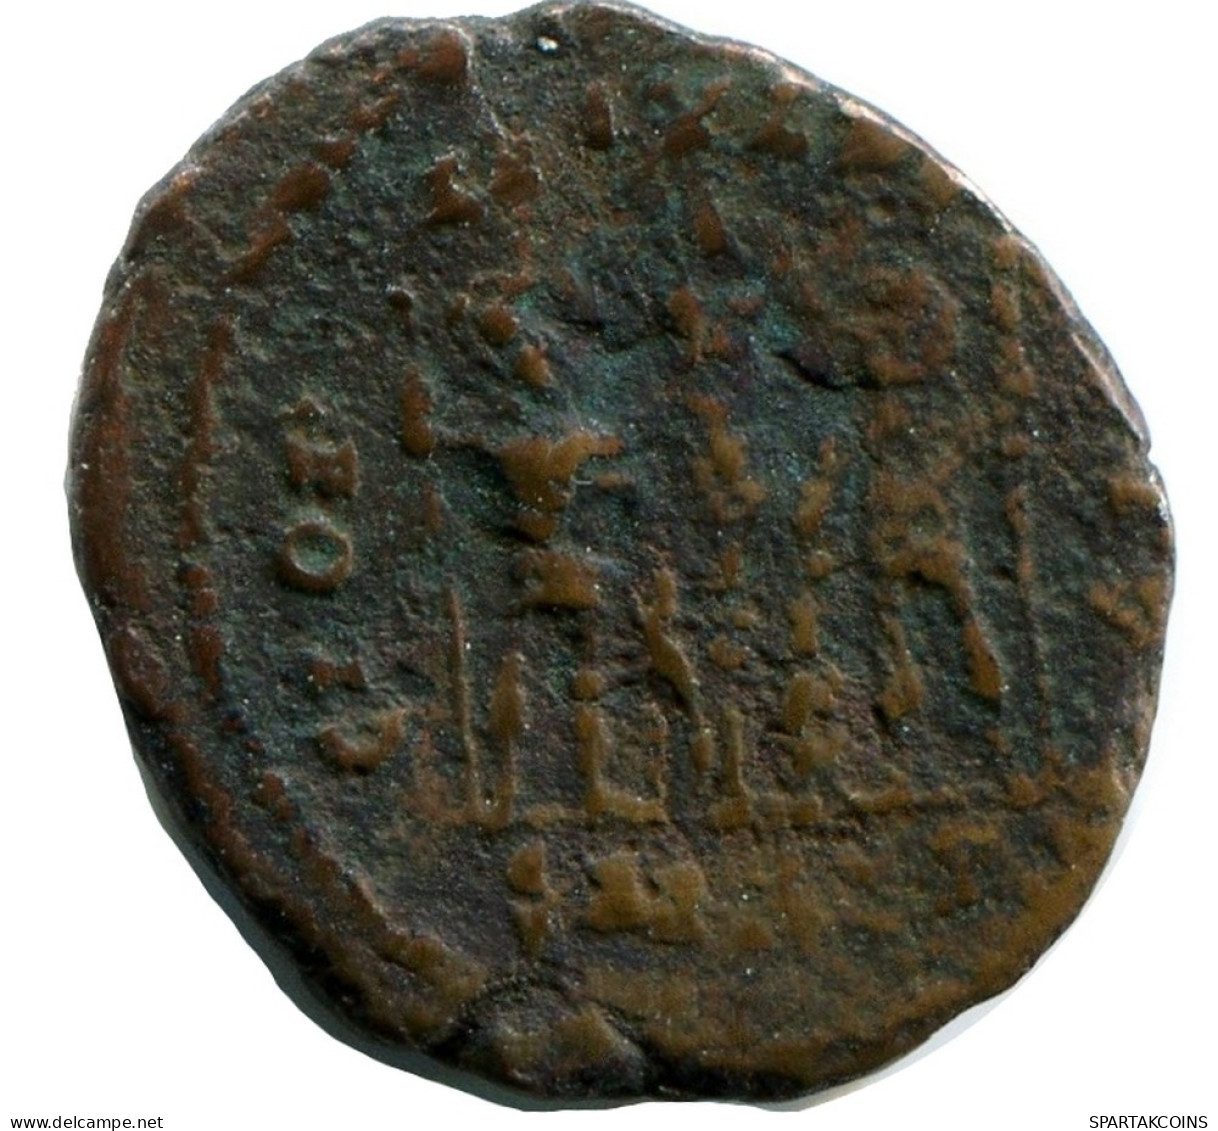 CONSTANS MINTED IN ALEKSANDRIA FOUND IN IHNASYAH HOARD EGYPT #ANC11362.14.F.A - The Christian Empire (307 AD Tot 363 AD)